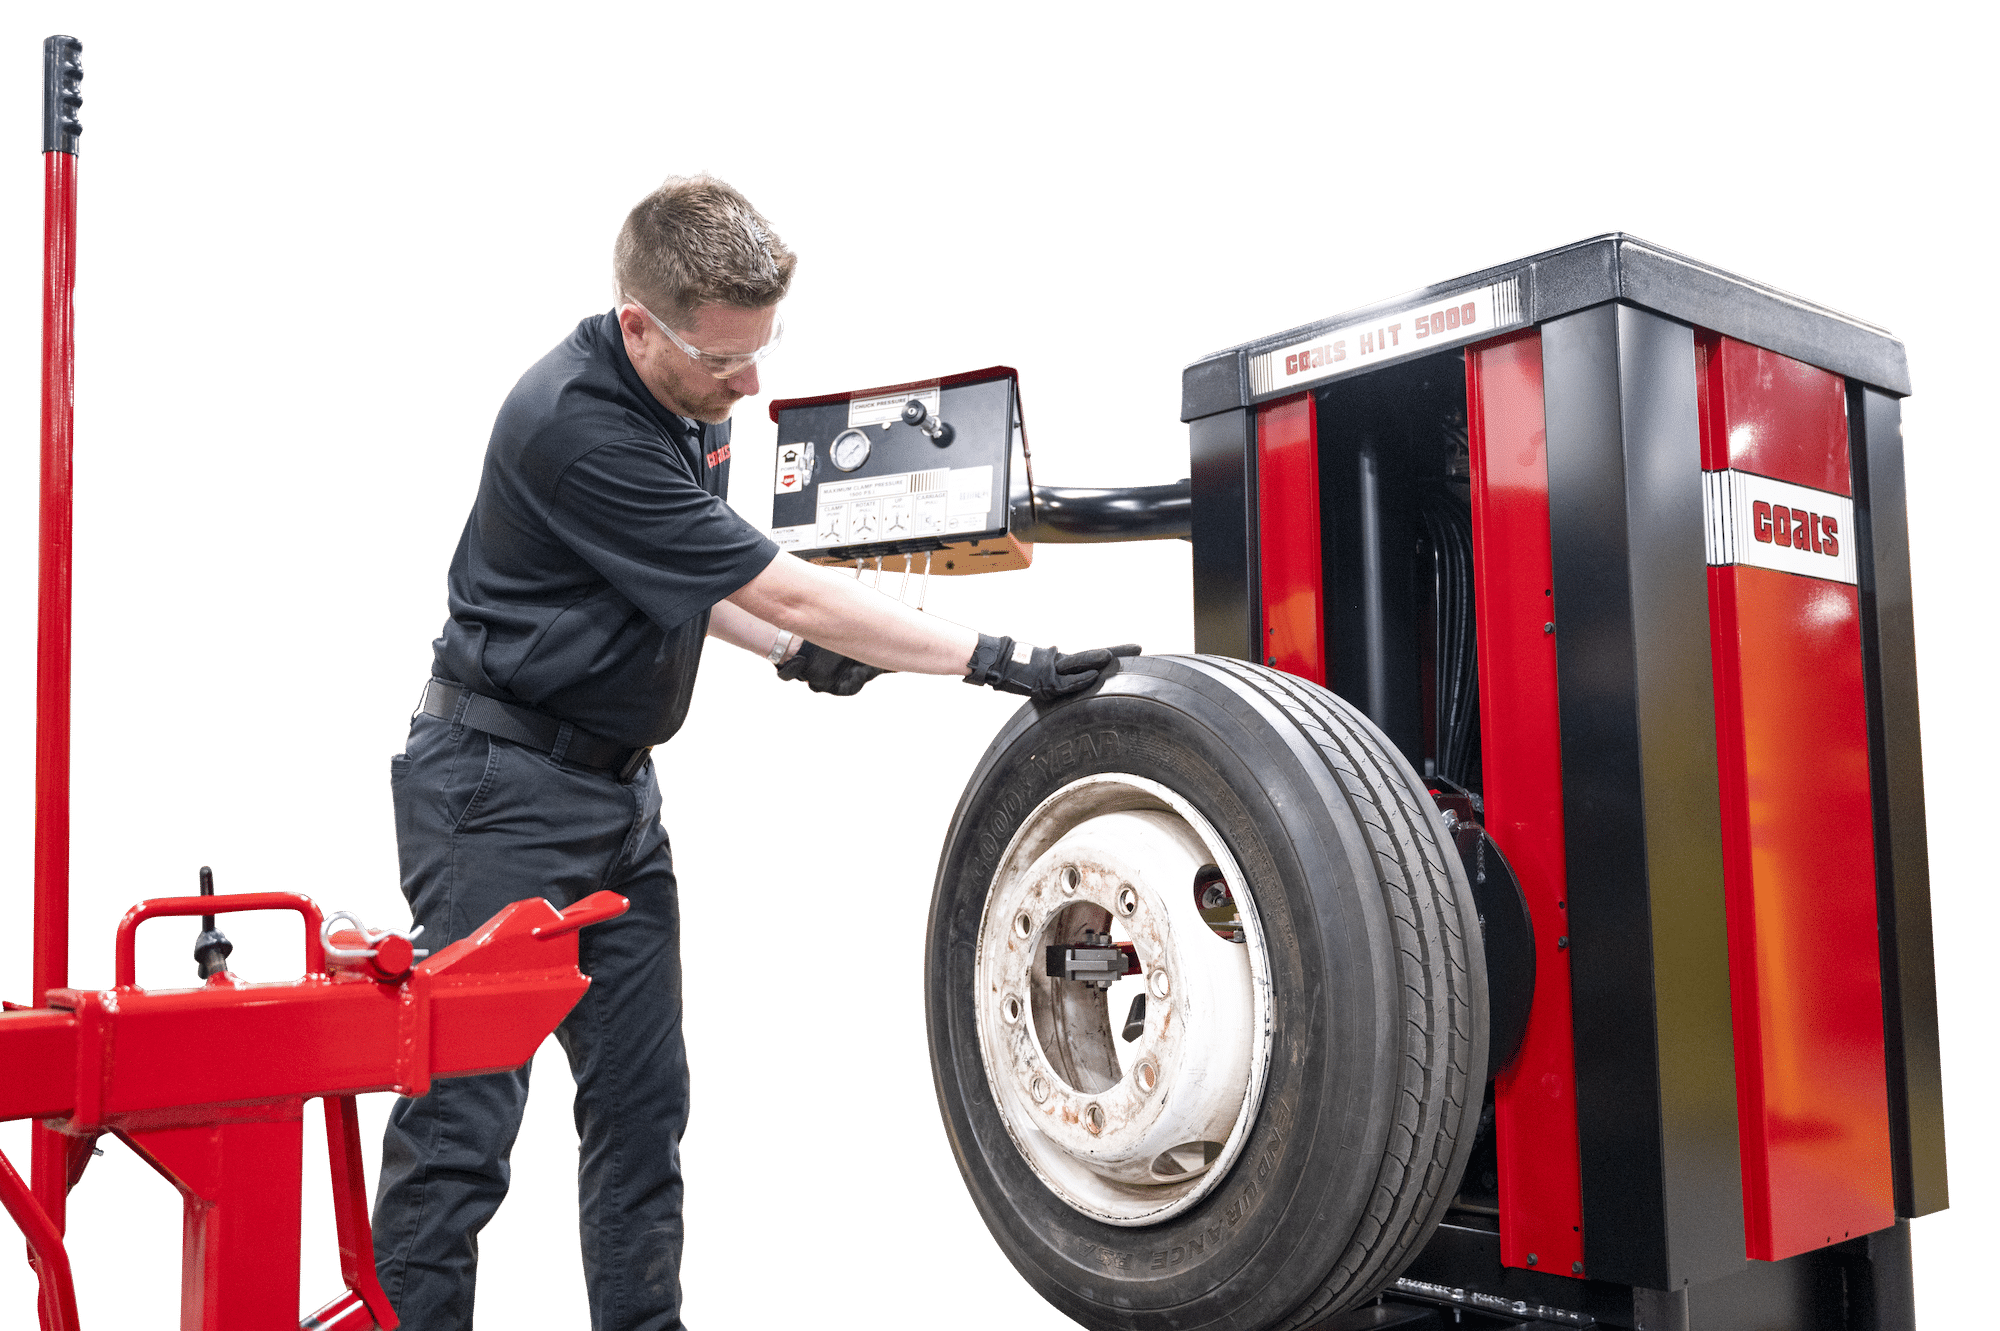 A technician has a hand placed on a tire mounted on a heavy duty tire changer in order to adjust and center the tire on the jaws of the machine